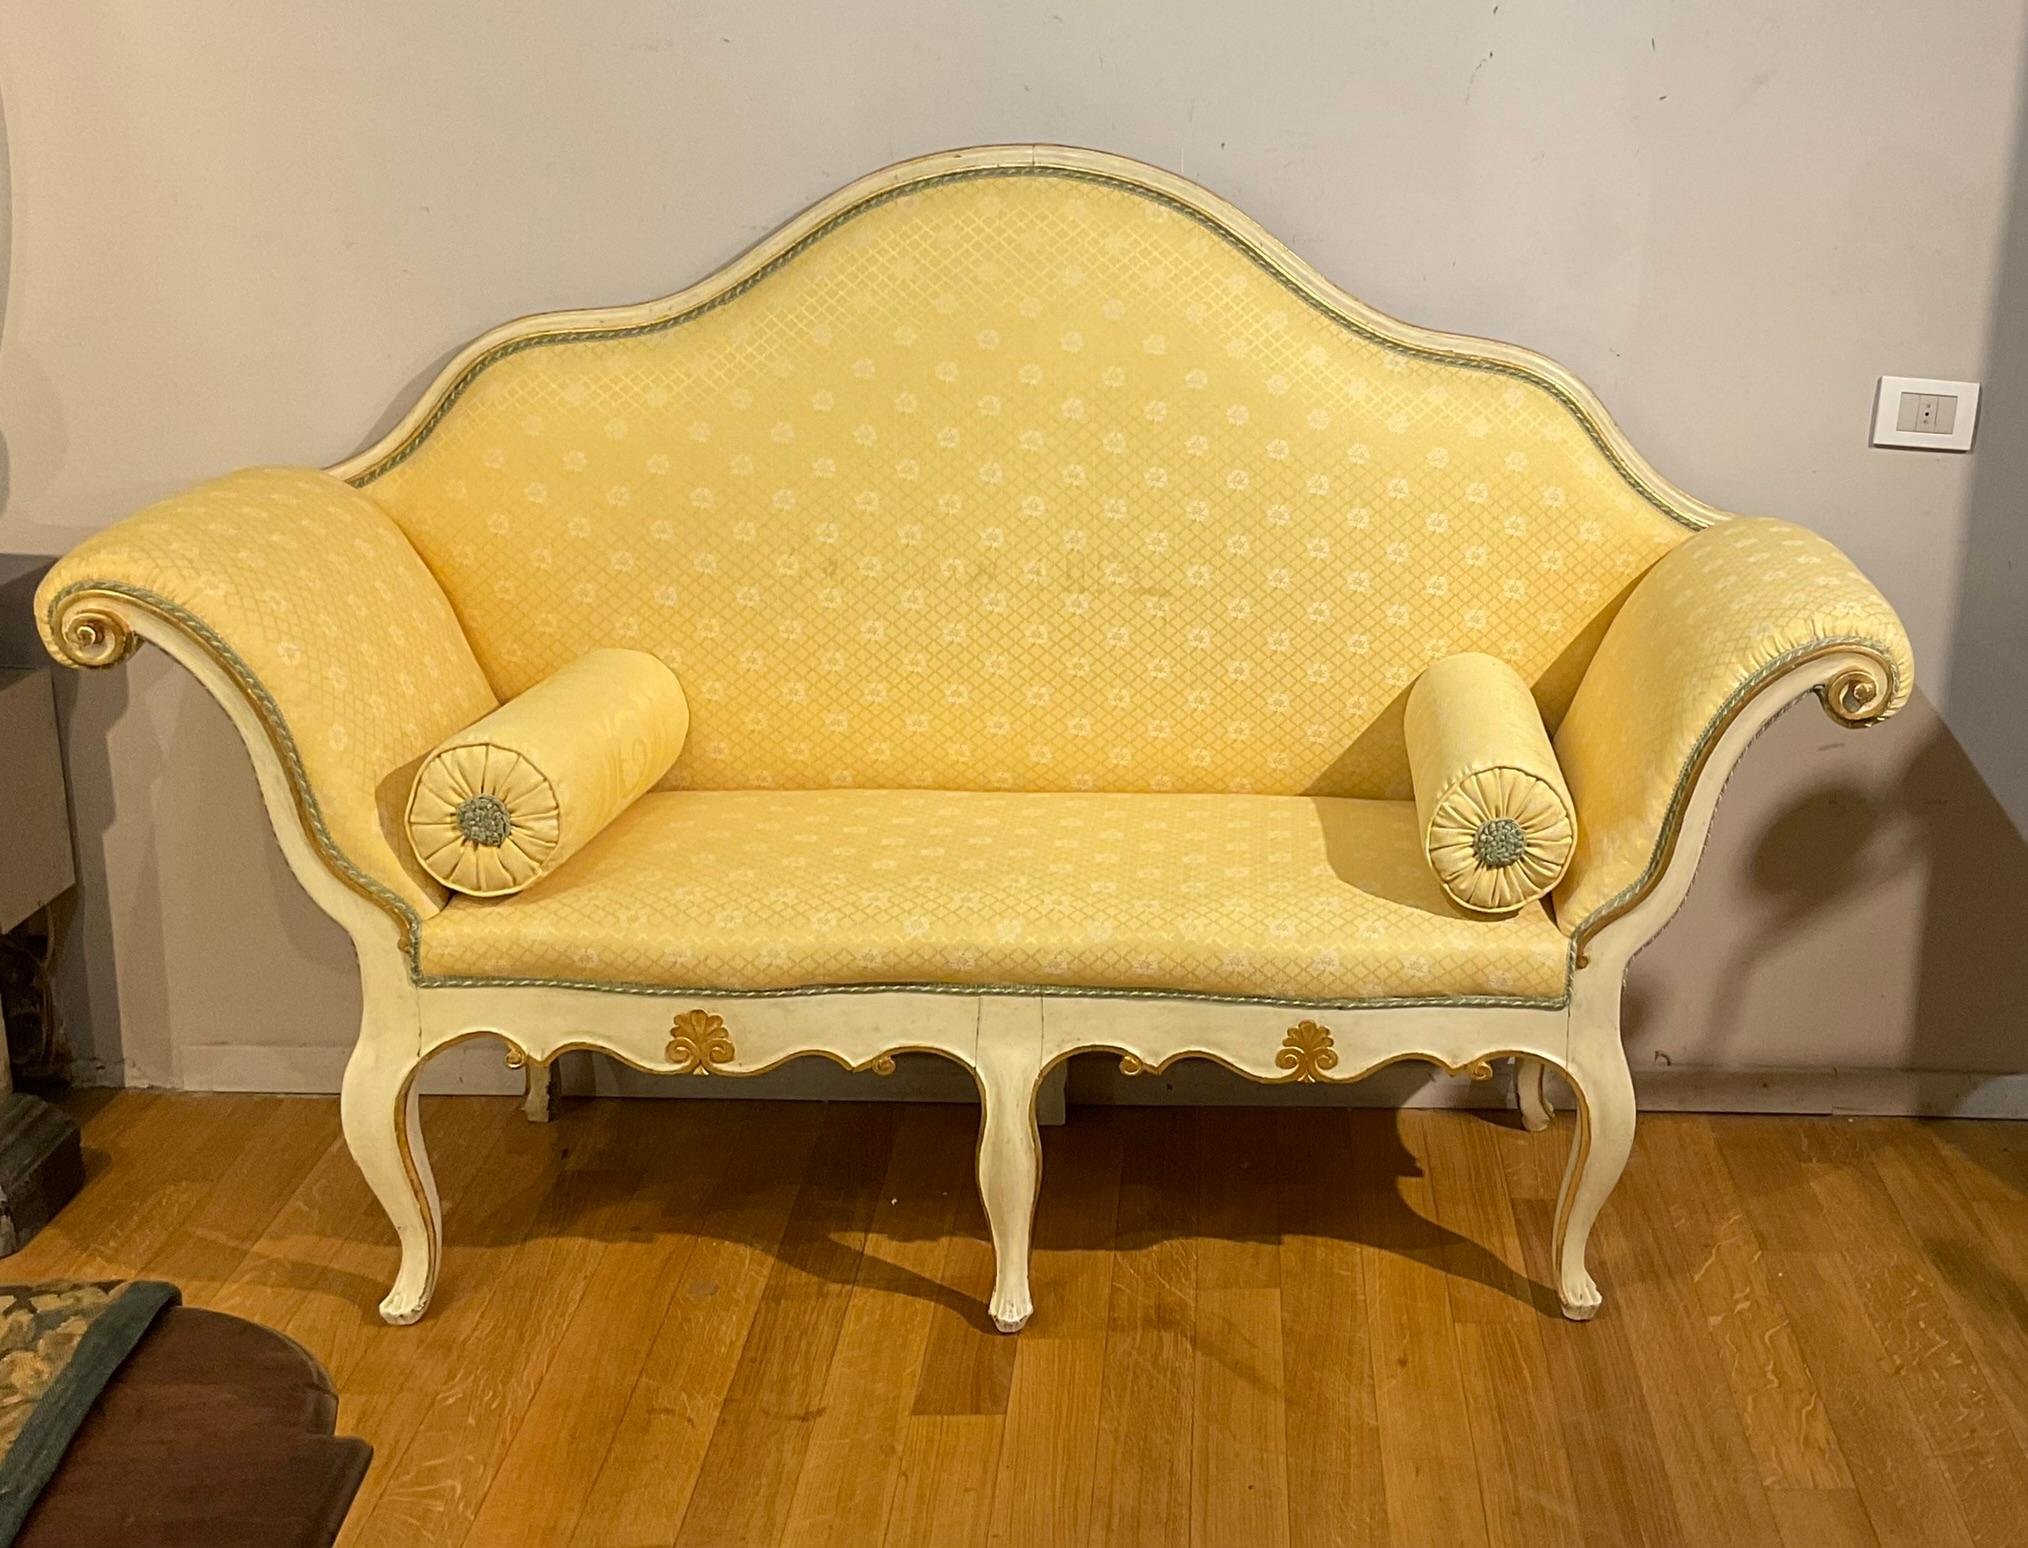 Elegant sofa in cream-colored painted wood with golden carvings typical of the 18th century Piedmontese manufacture. Five wavy legs also carved. Very comfortable despite not having a great depth. Finished with upholstery rollers.
Upholstery in